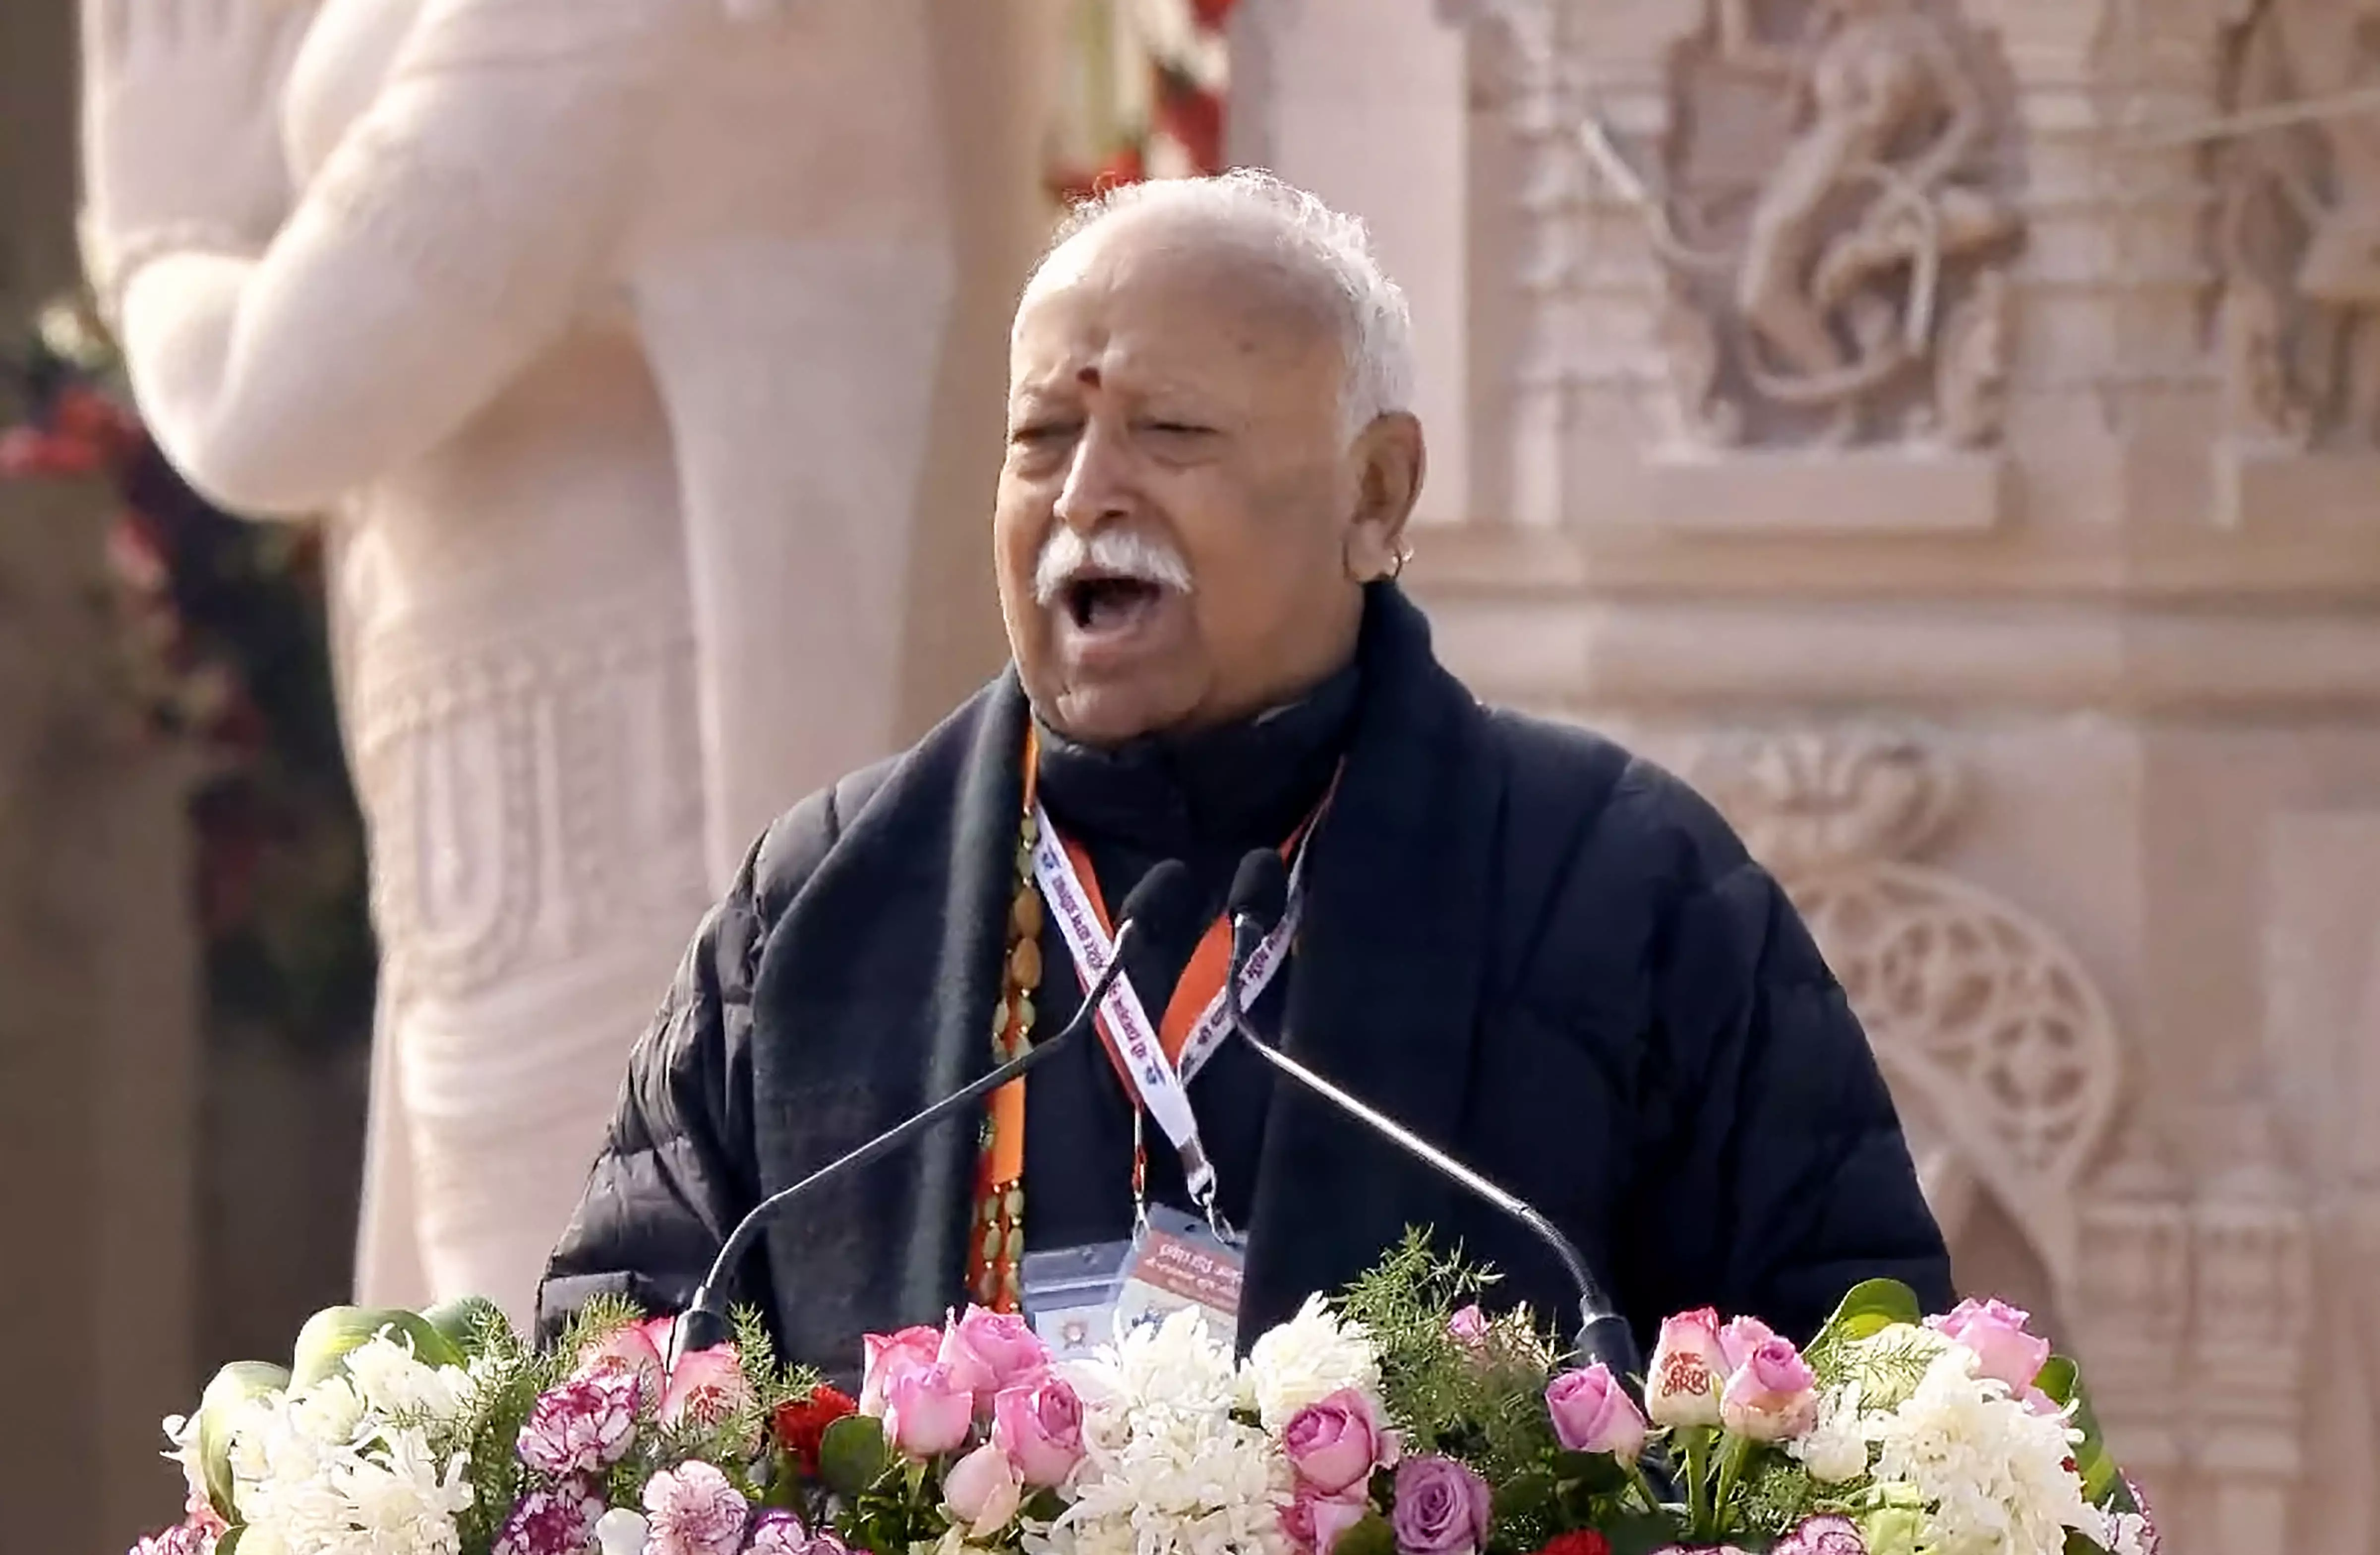 RSS Chief Bhagwat Urges Unity as Ayodhya Temple Consecration Marks New India